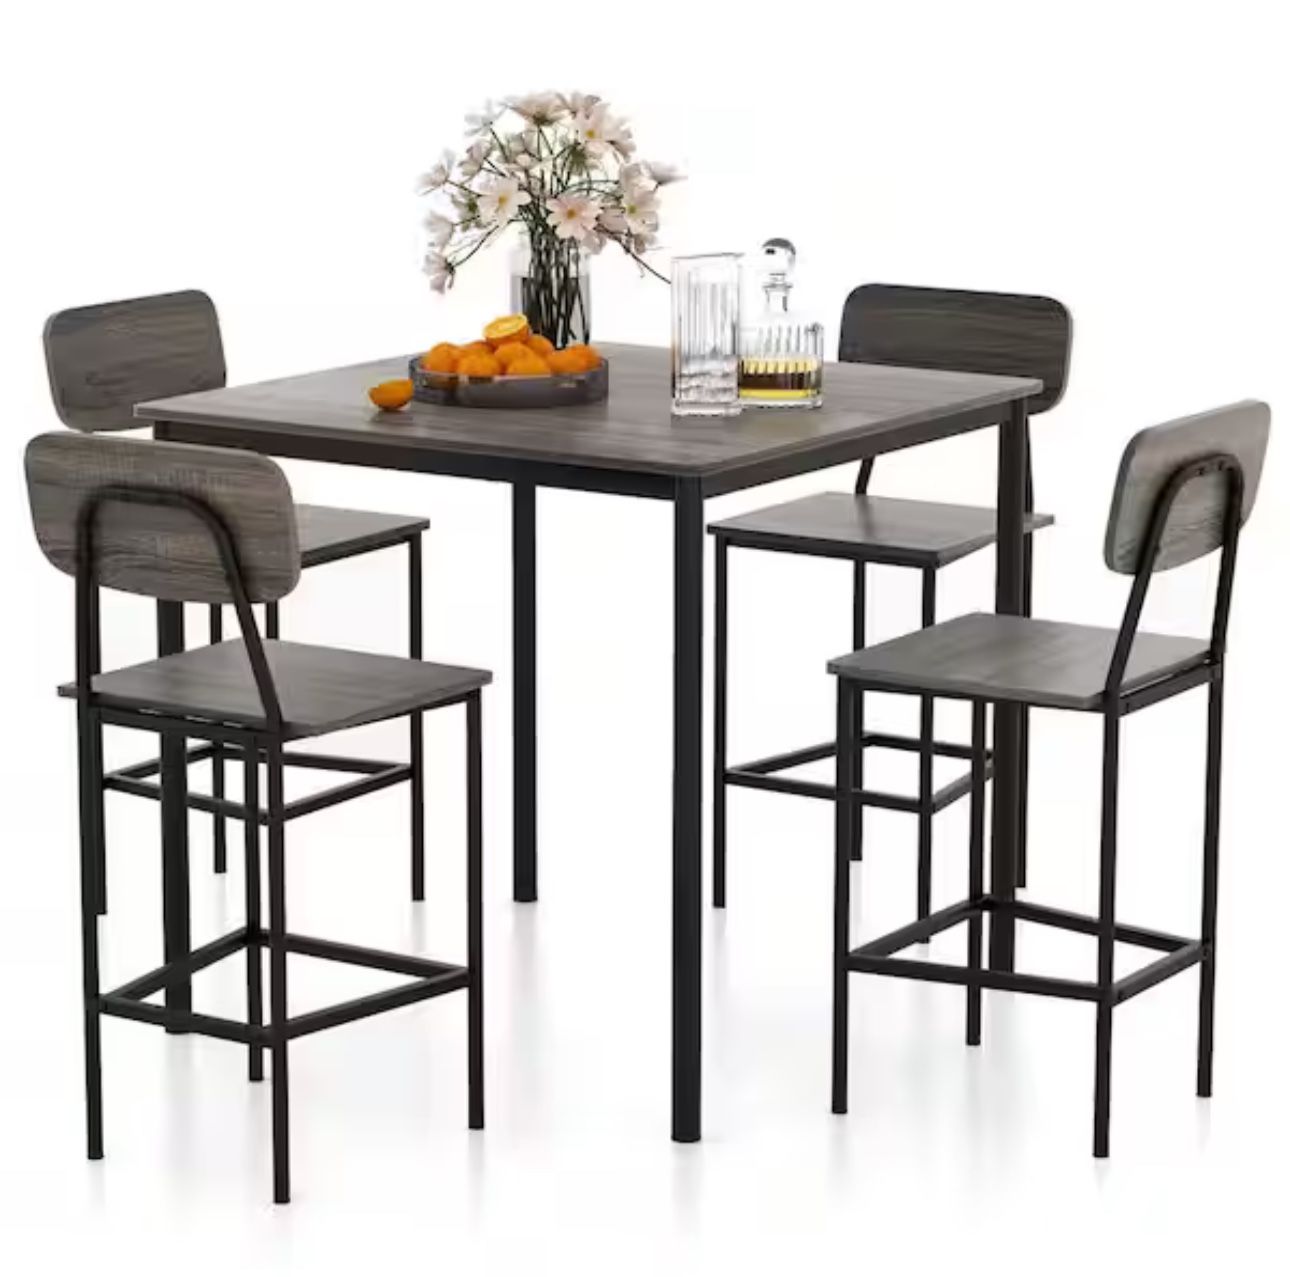 5 Piece Grey Wood Dining Table Set